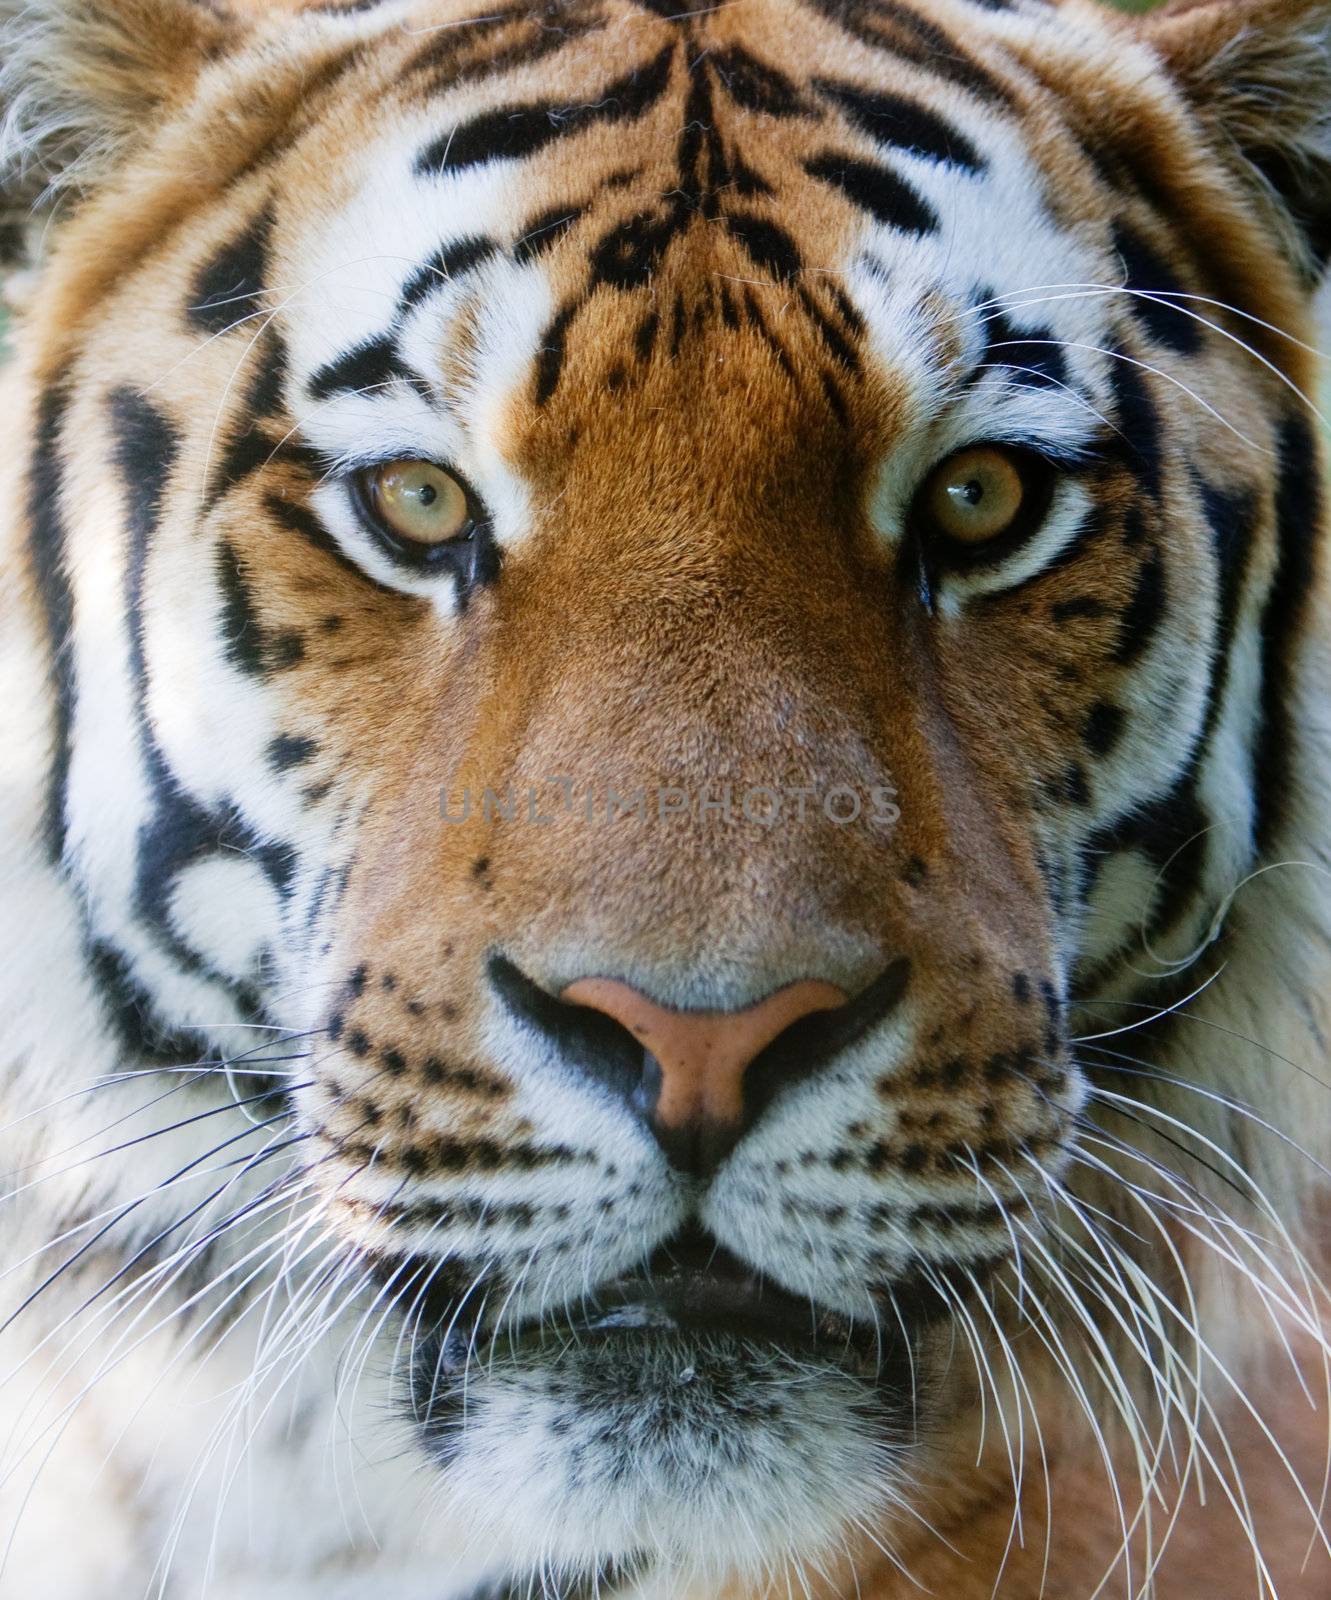 Wilt tiger with yellow and black stripes staring with penetrating eyes